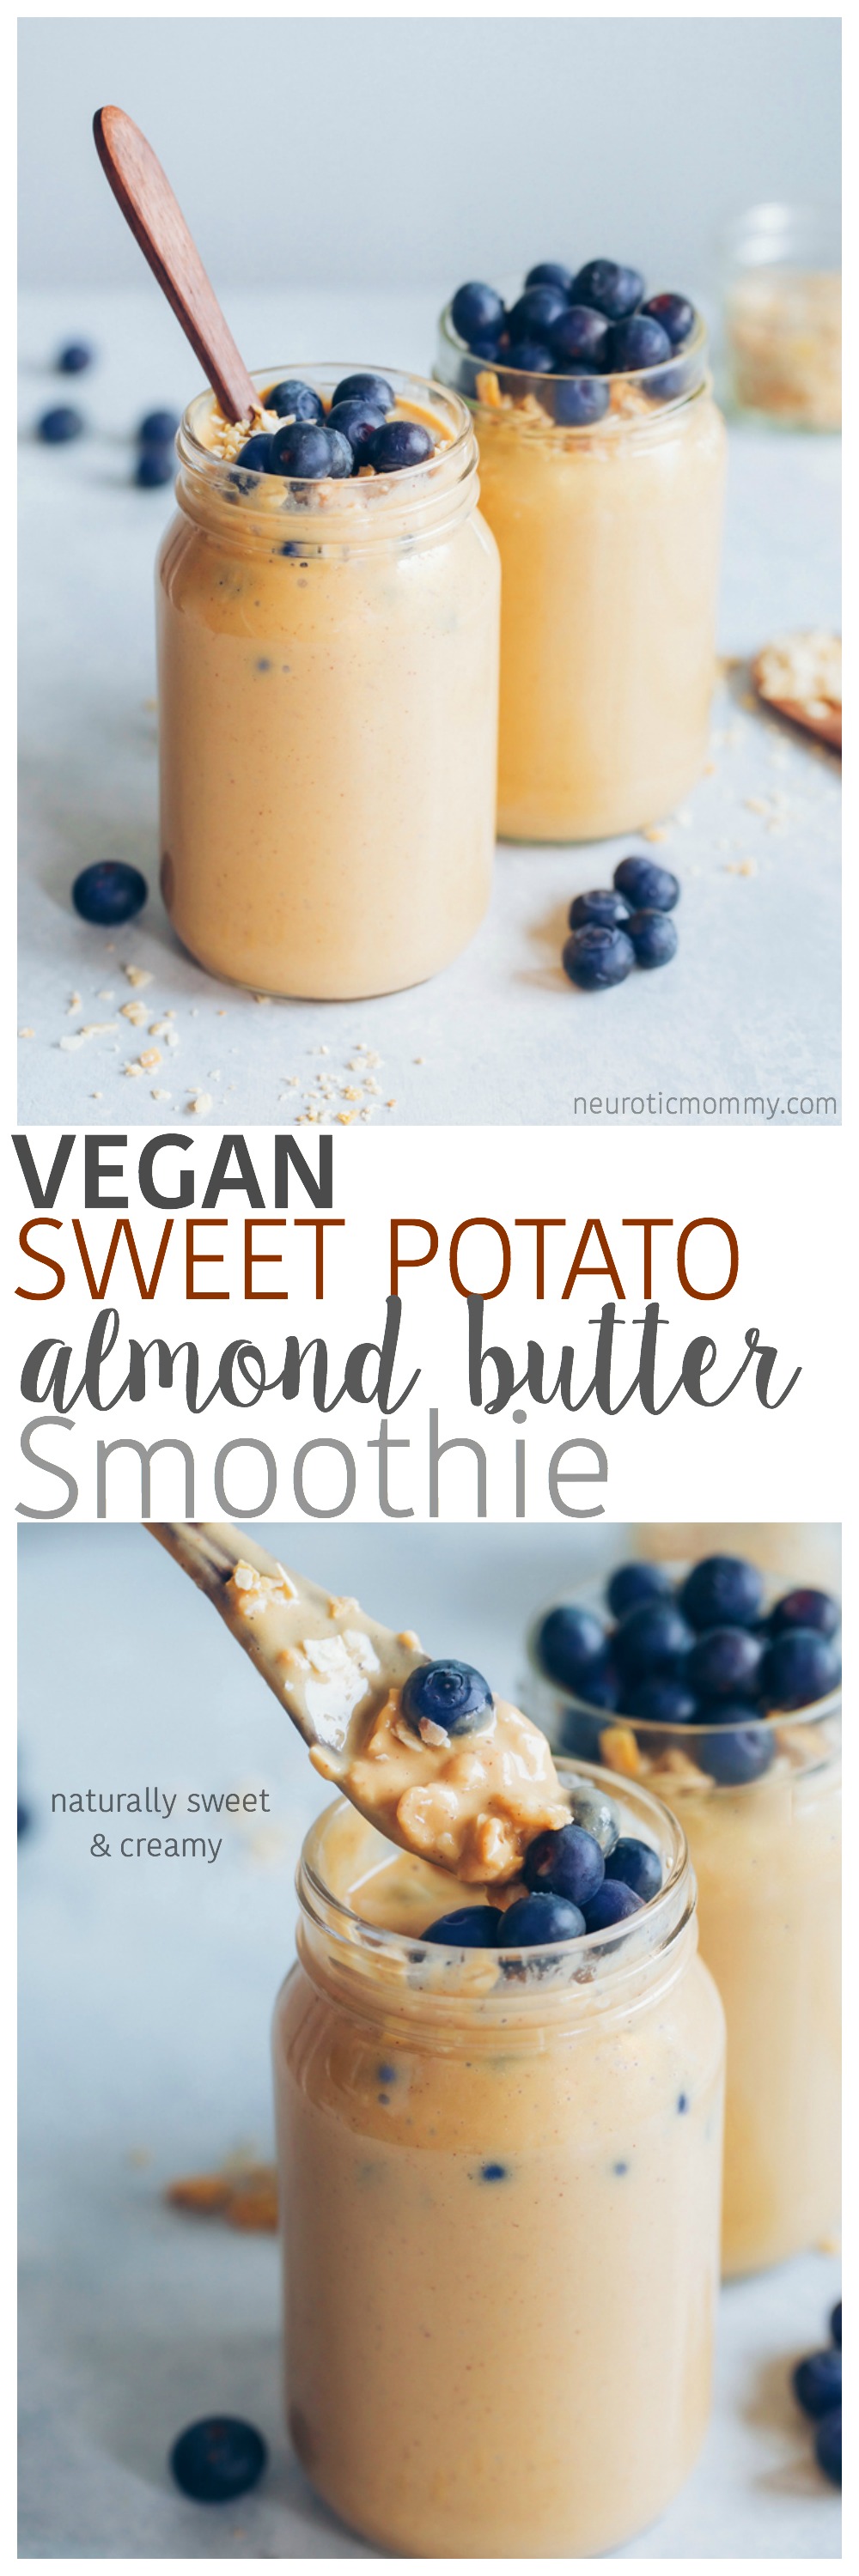 This sweet potato almond butter smoothie is warming, naturally sweet and creamy, and packed with nutrition that is quality for keeping your Qi balanced. NeuroticMommy.com #vegansmoothies #sweetpotato